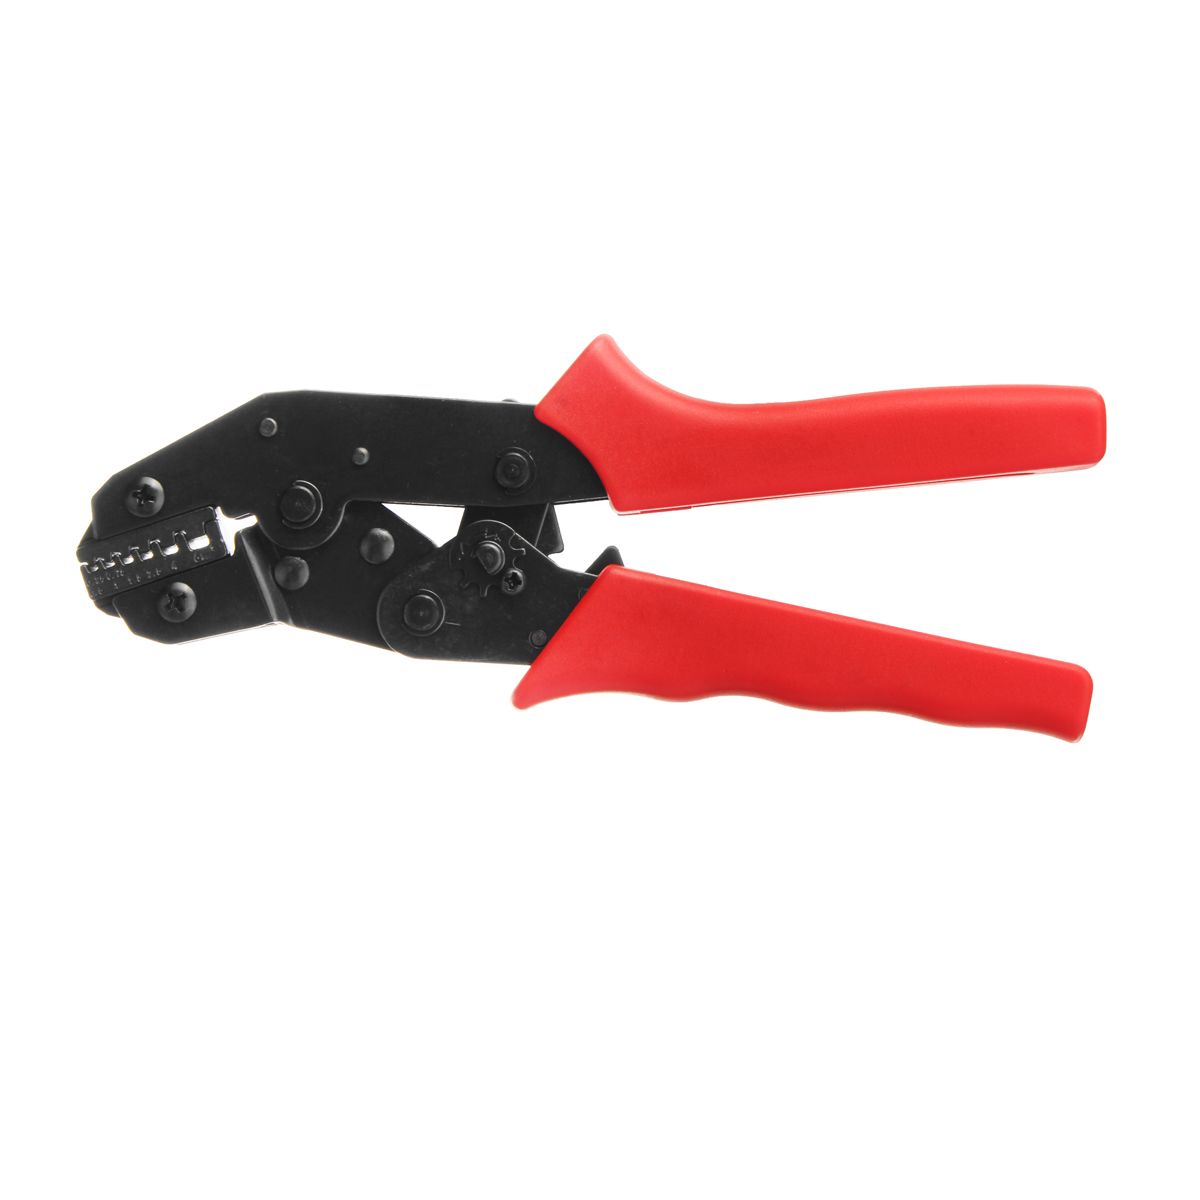 SN-06WF-025-6mmsup2-23-10AWG-Crimper-Plier-End-sleeve-Cable-Clamp-Locking-Crimping-Tool-1318485